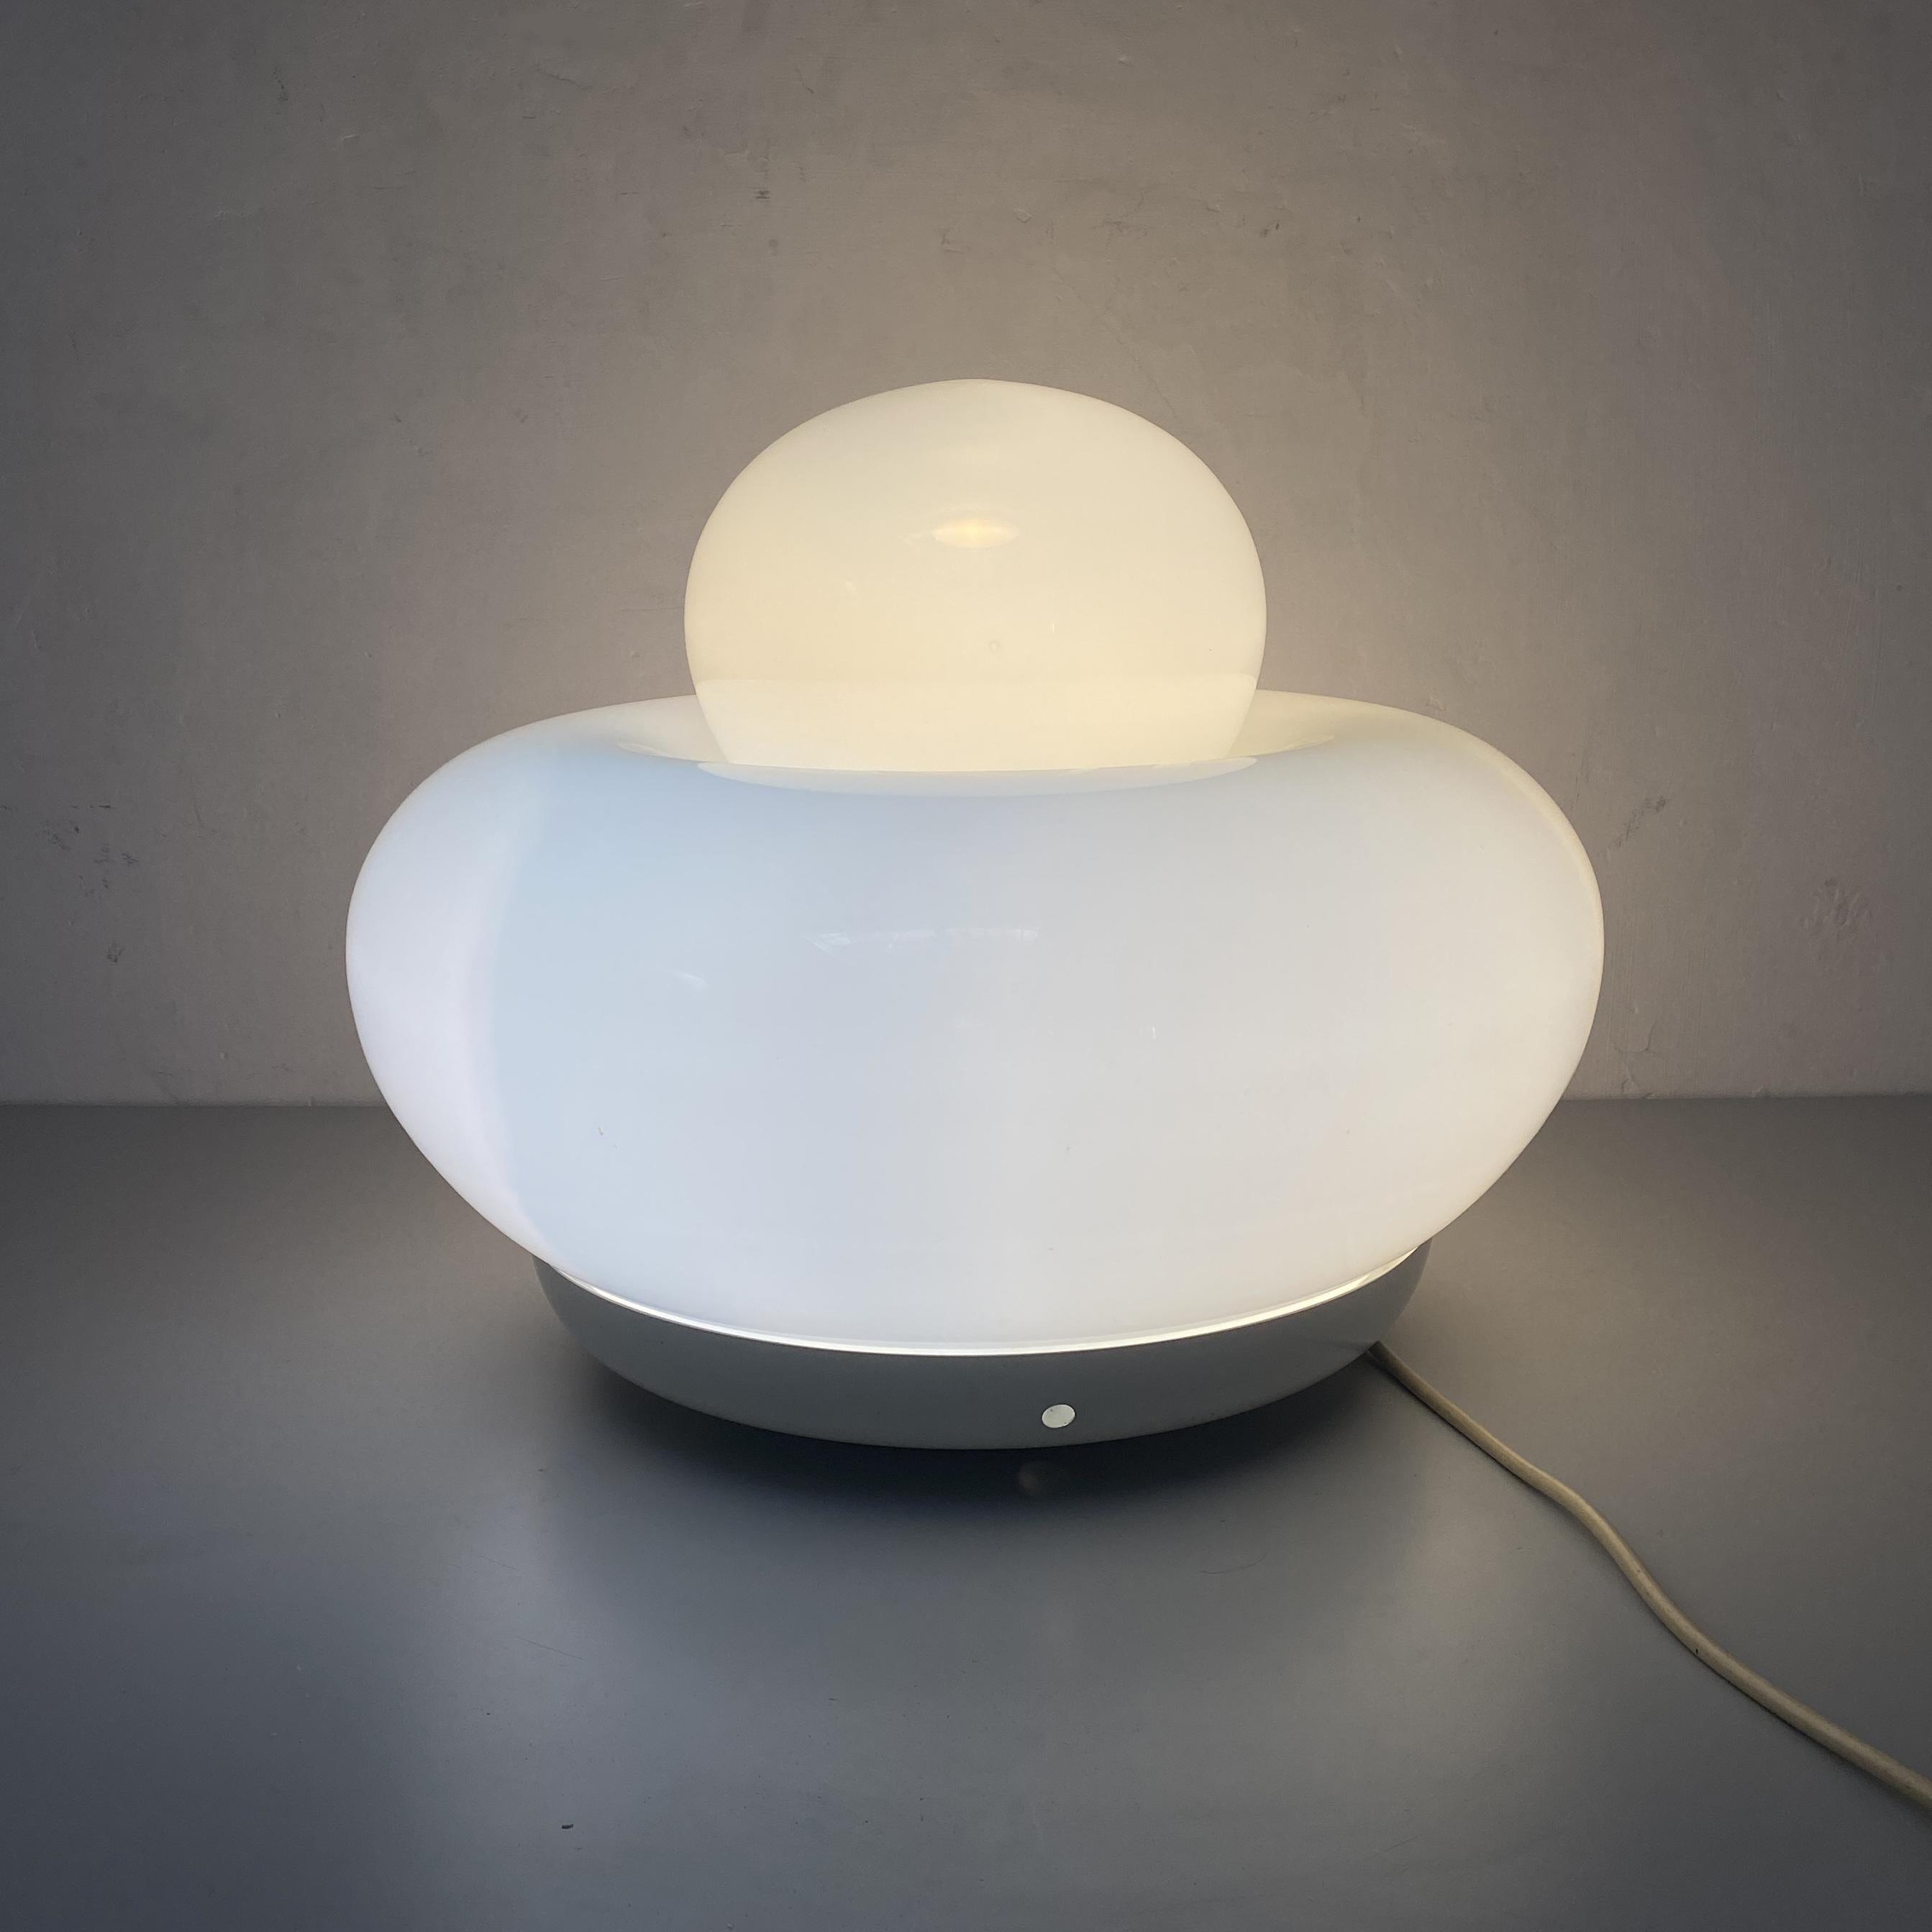 Electra table lamp by Giuliana Gramigna for Artemide, 1968
Glass table lamp with large round base in white glass and a smaller rounded top.
This table lamp was designed by Giuliana Gramigna and was produced by Artemide in Italy in 1968.

Good